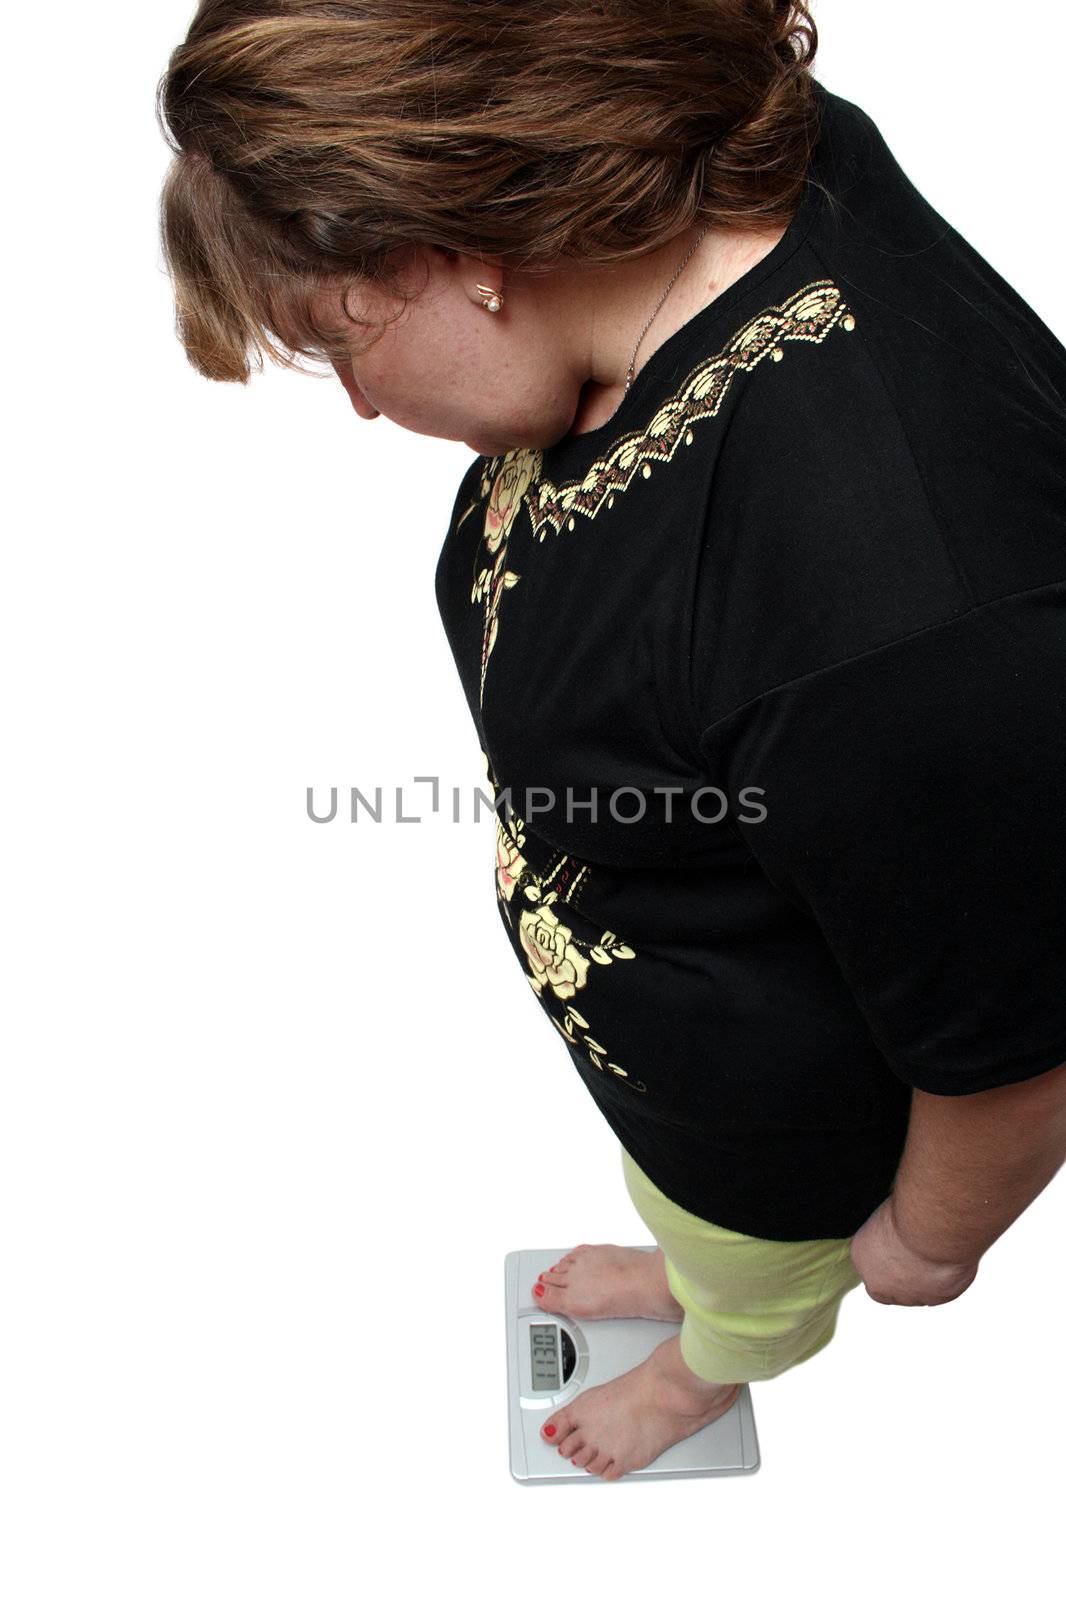 women with overweight looking on scales by Mikko